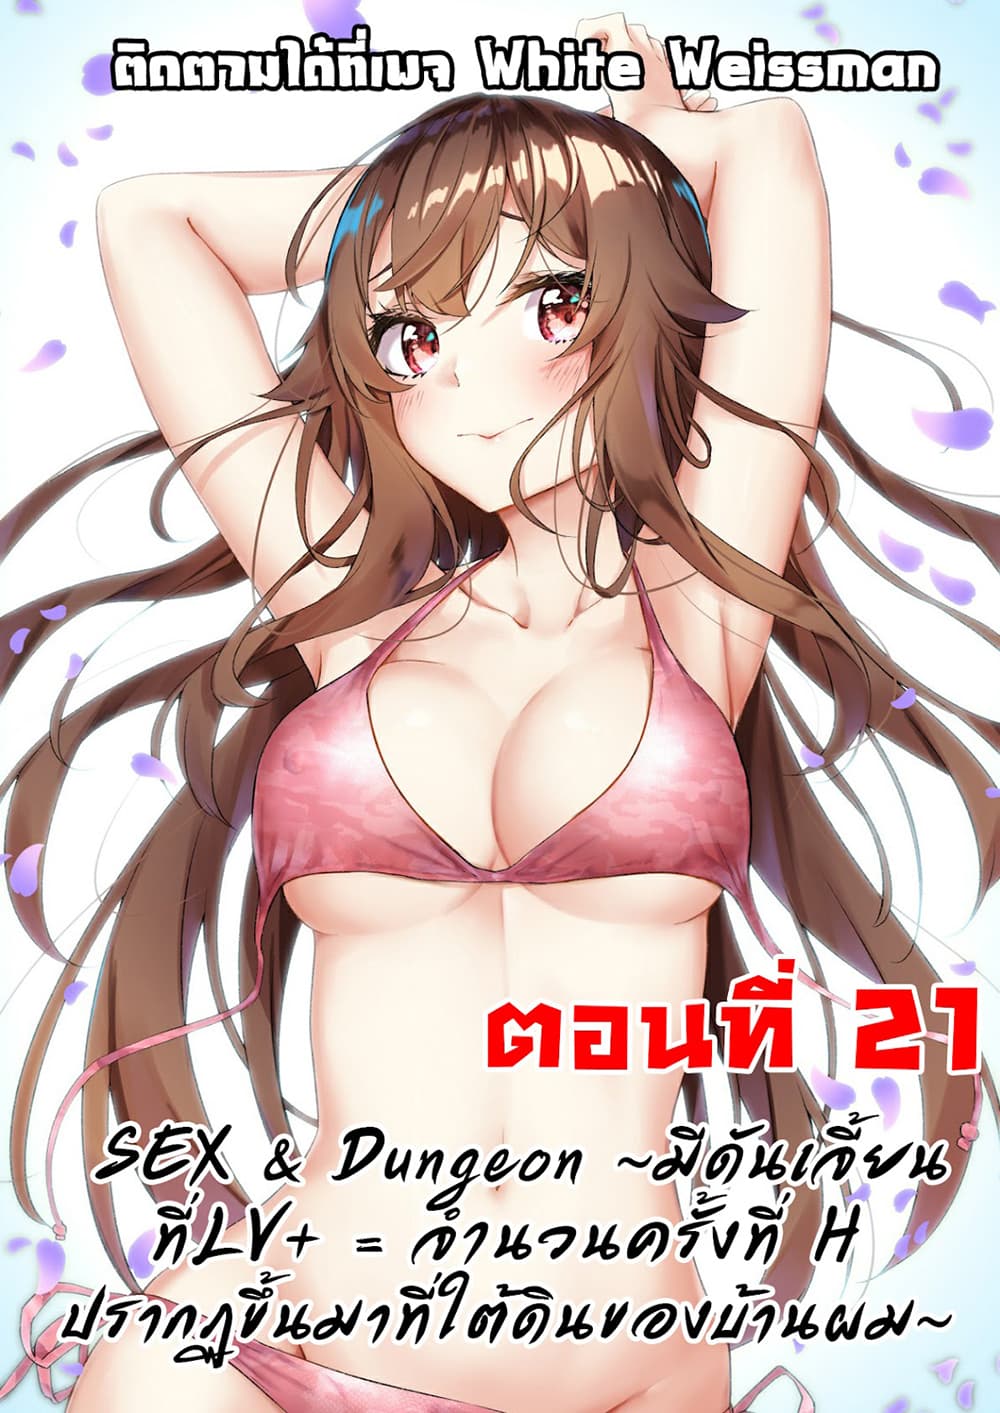 Sex and Dungeon! 21-21